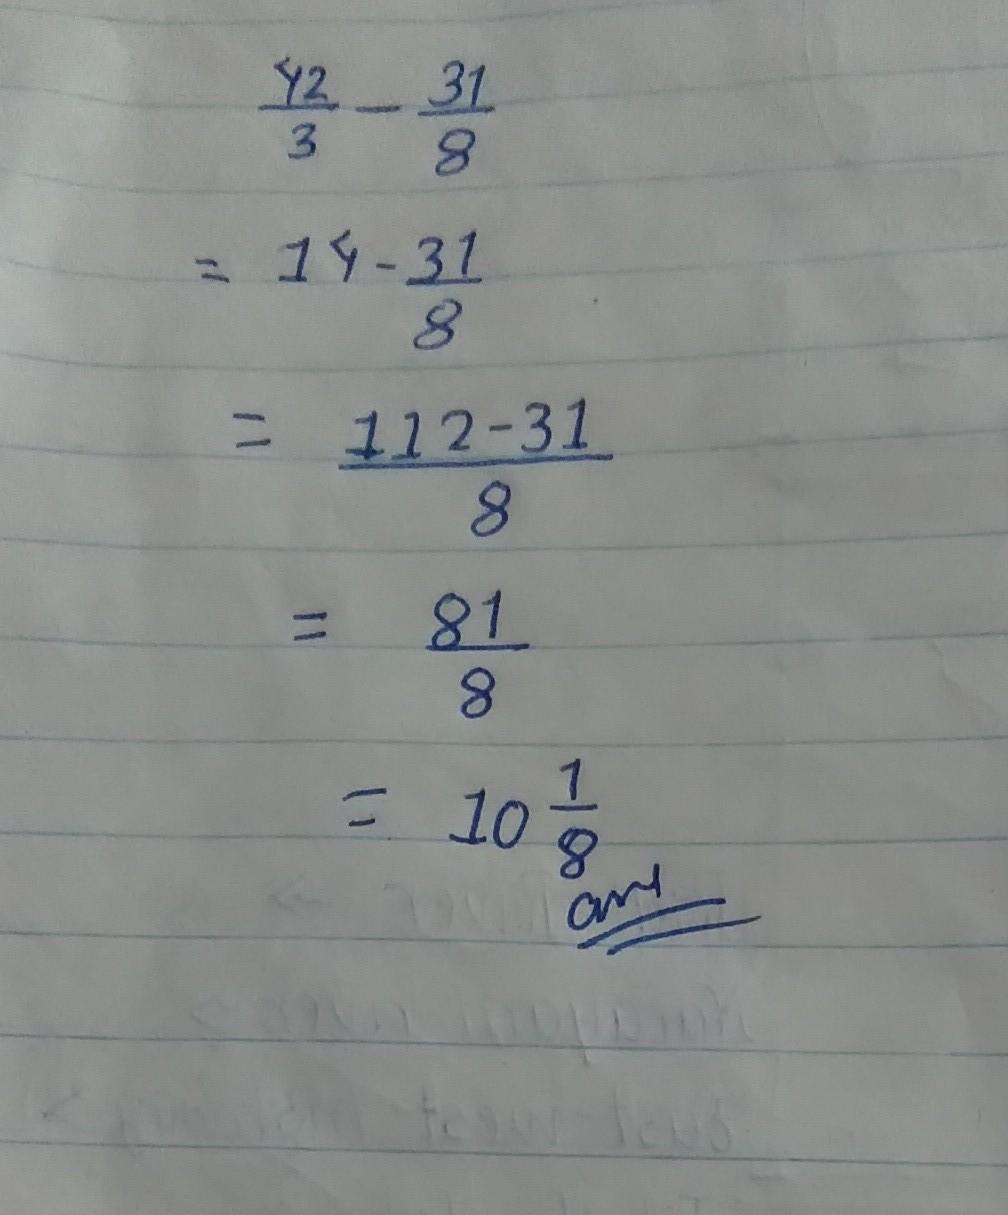 4 2/3 - 3 1/8Leave Your Answer As A Mixed Fraction